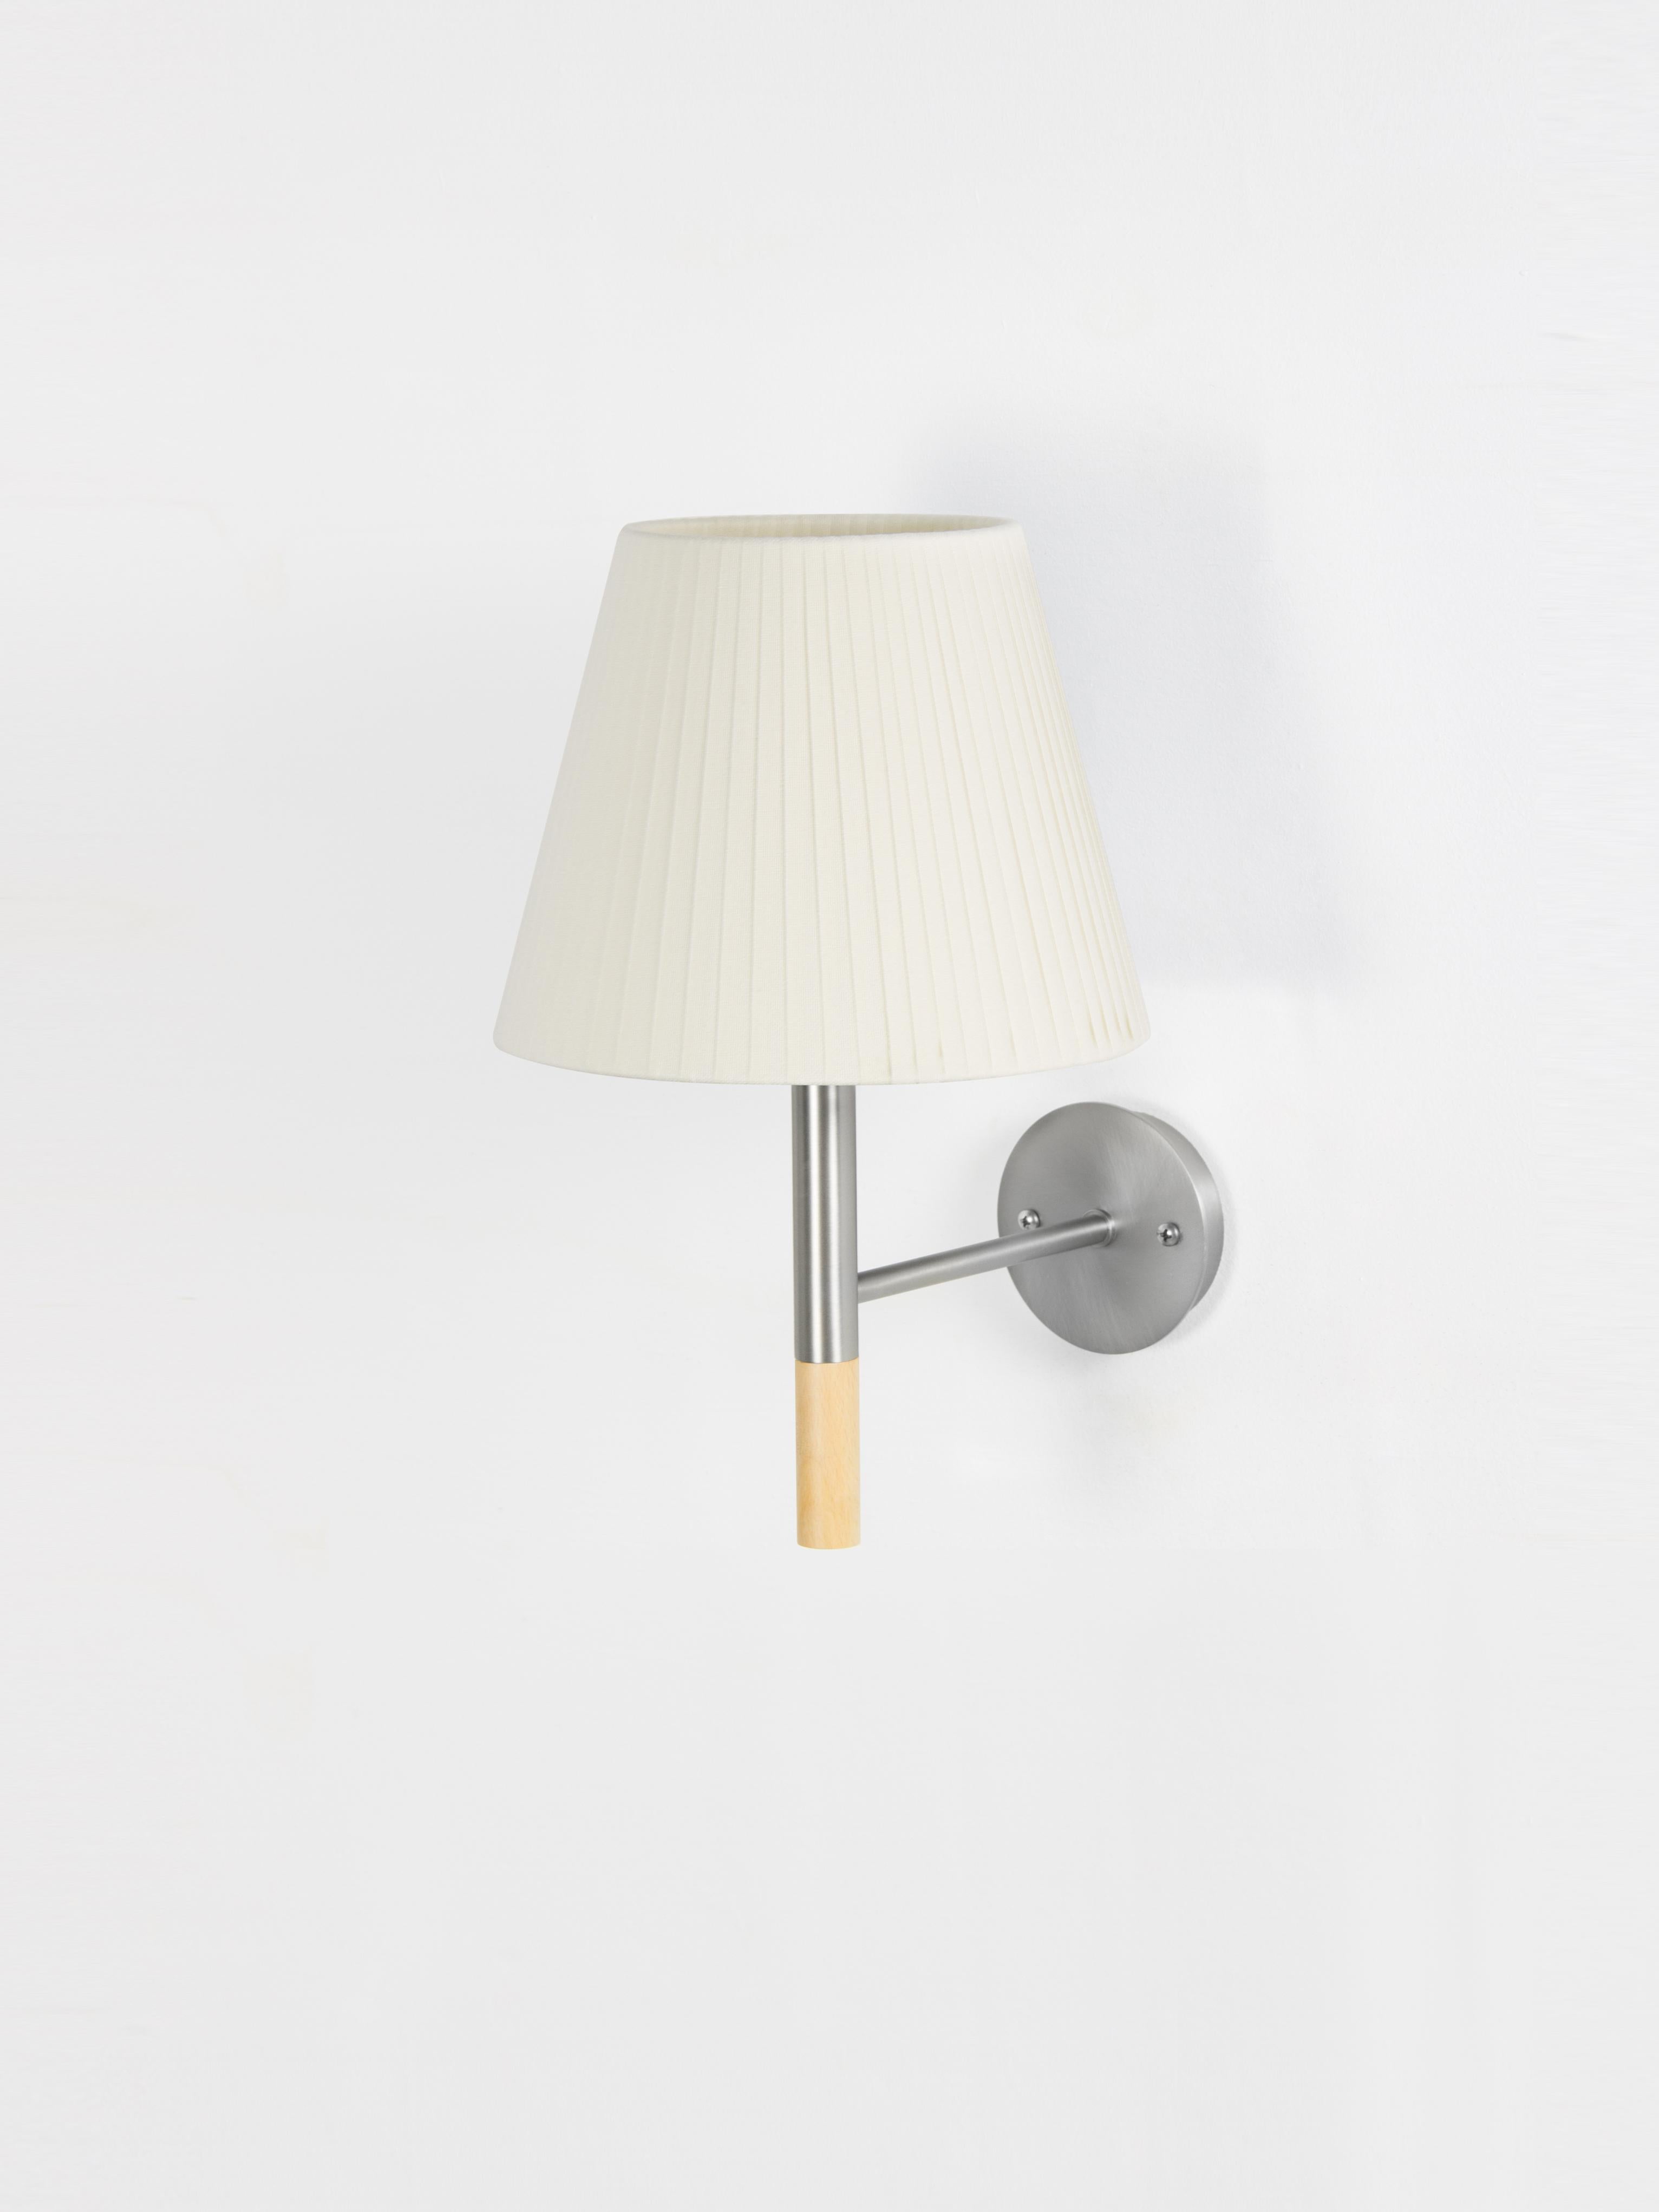 Natural BC2 wall lamp by Santa & Cole
Dimensions: D 20 x W 26 x H 33 cm
Materials: Metal, beech wood, ribbon.

The BC1, BC2 and BC3 wall lamps are the epitome of sturdy construction, aesthetic sobriety and functional quality. Their various shade